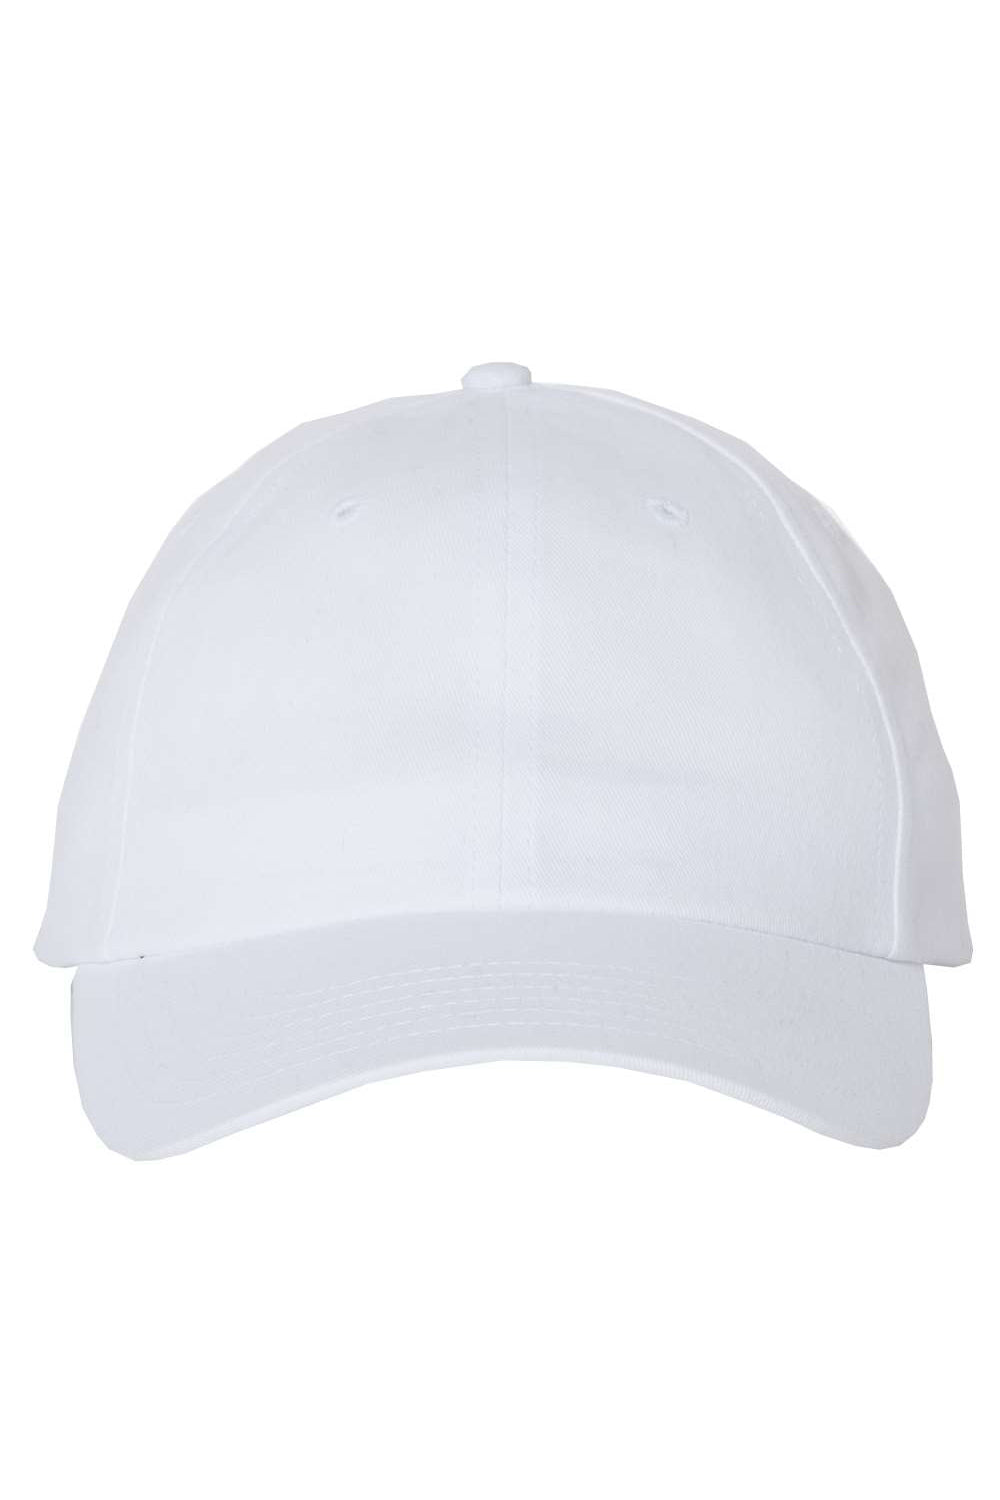 Valucap VC200 Mens Brushed Twill Hat White Flat Front